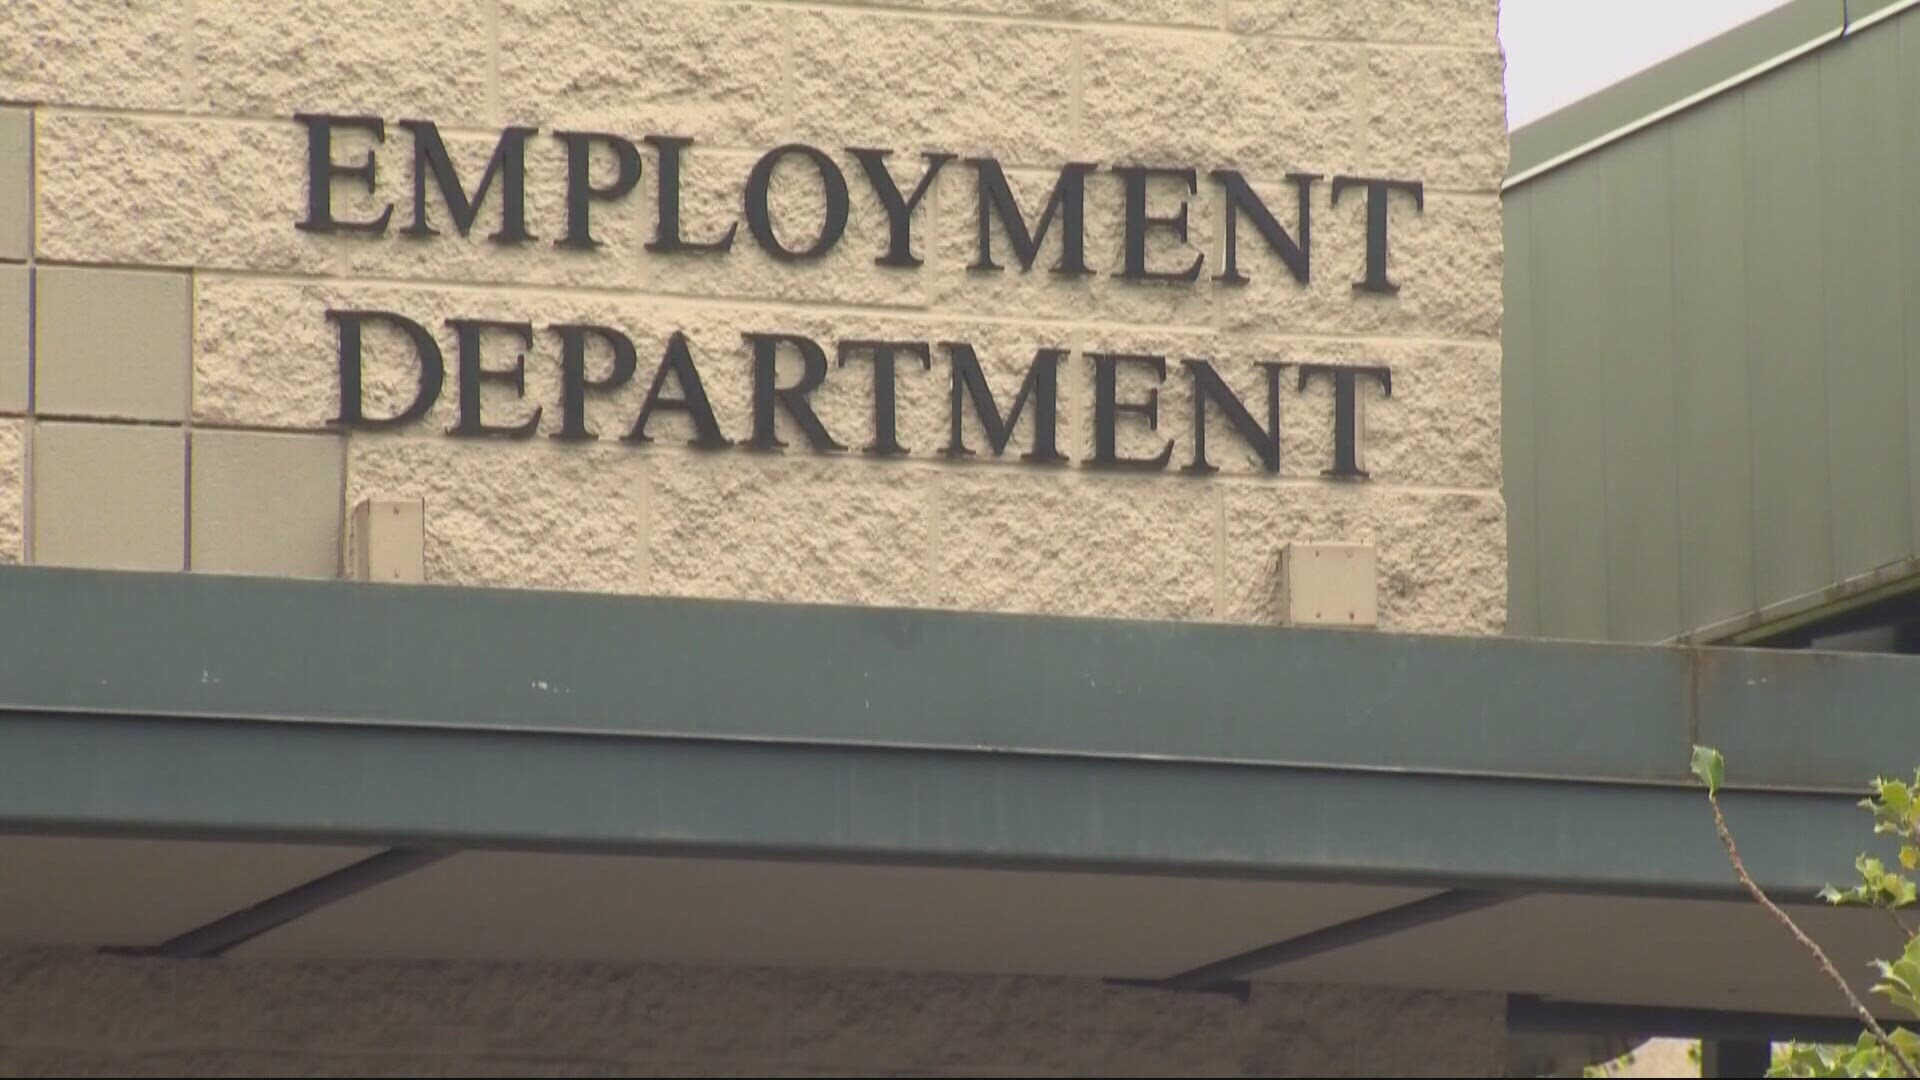 More than a year into the pandemic, speaking with someone at the Oregon Employment Department is still difficult. Morgan Romero reports.